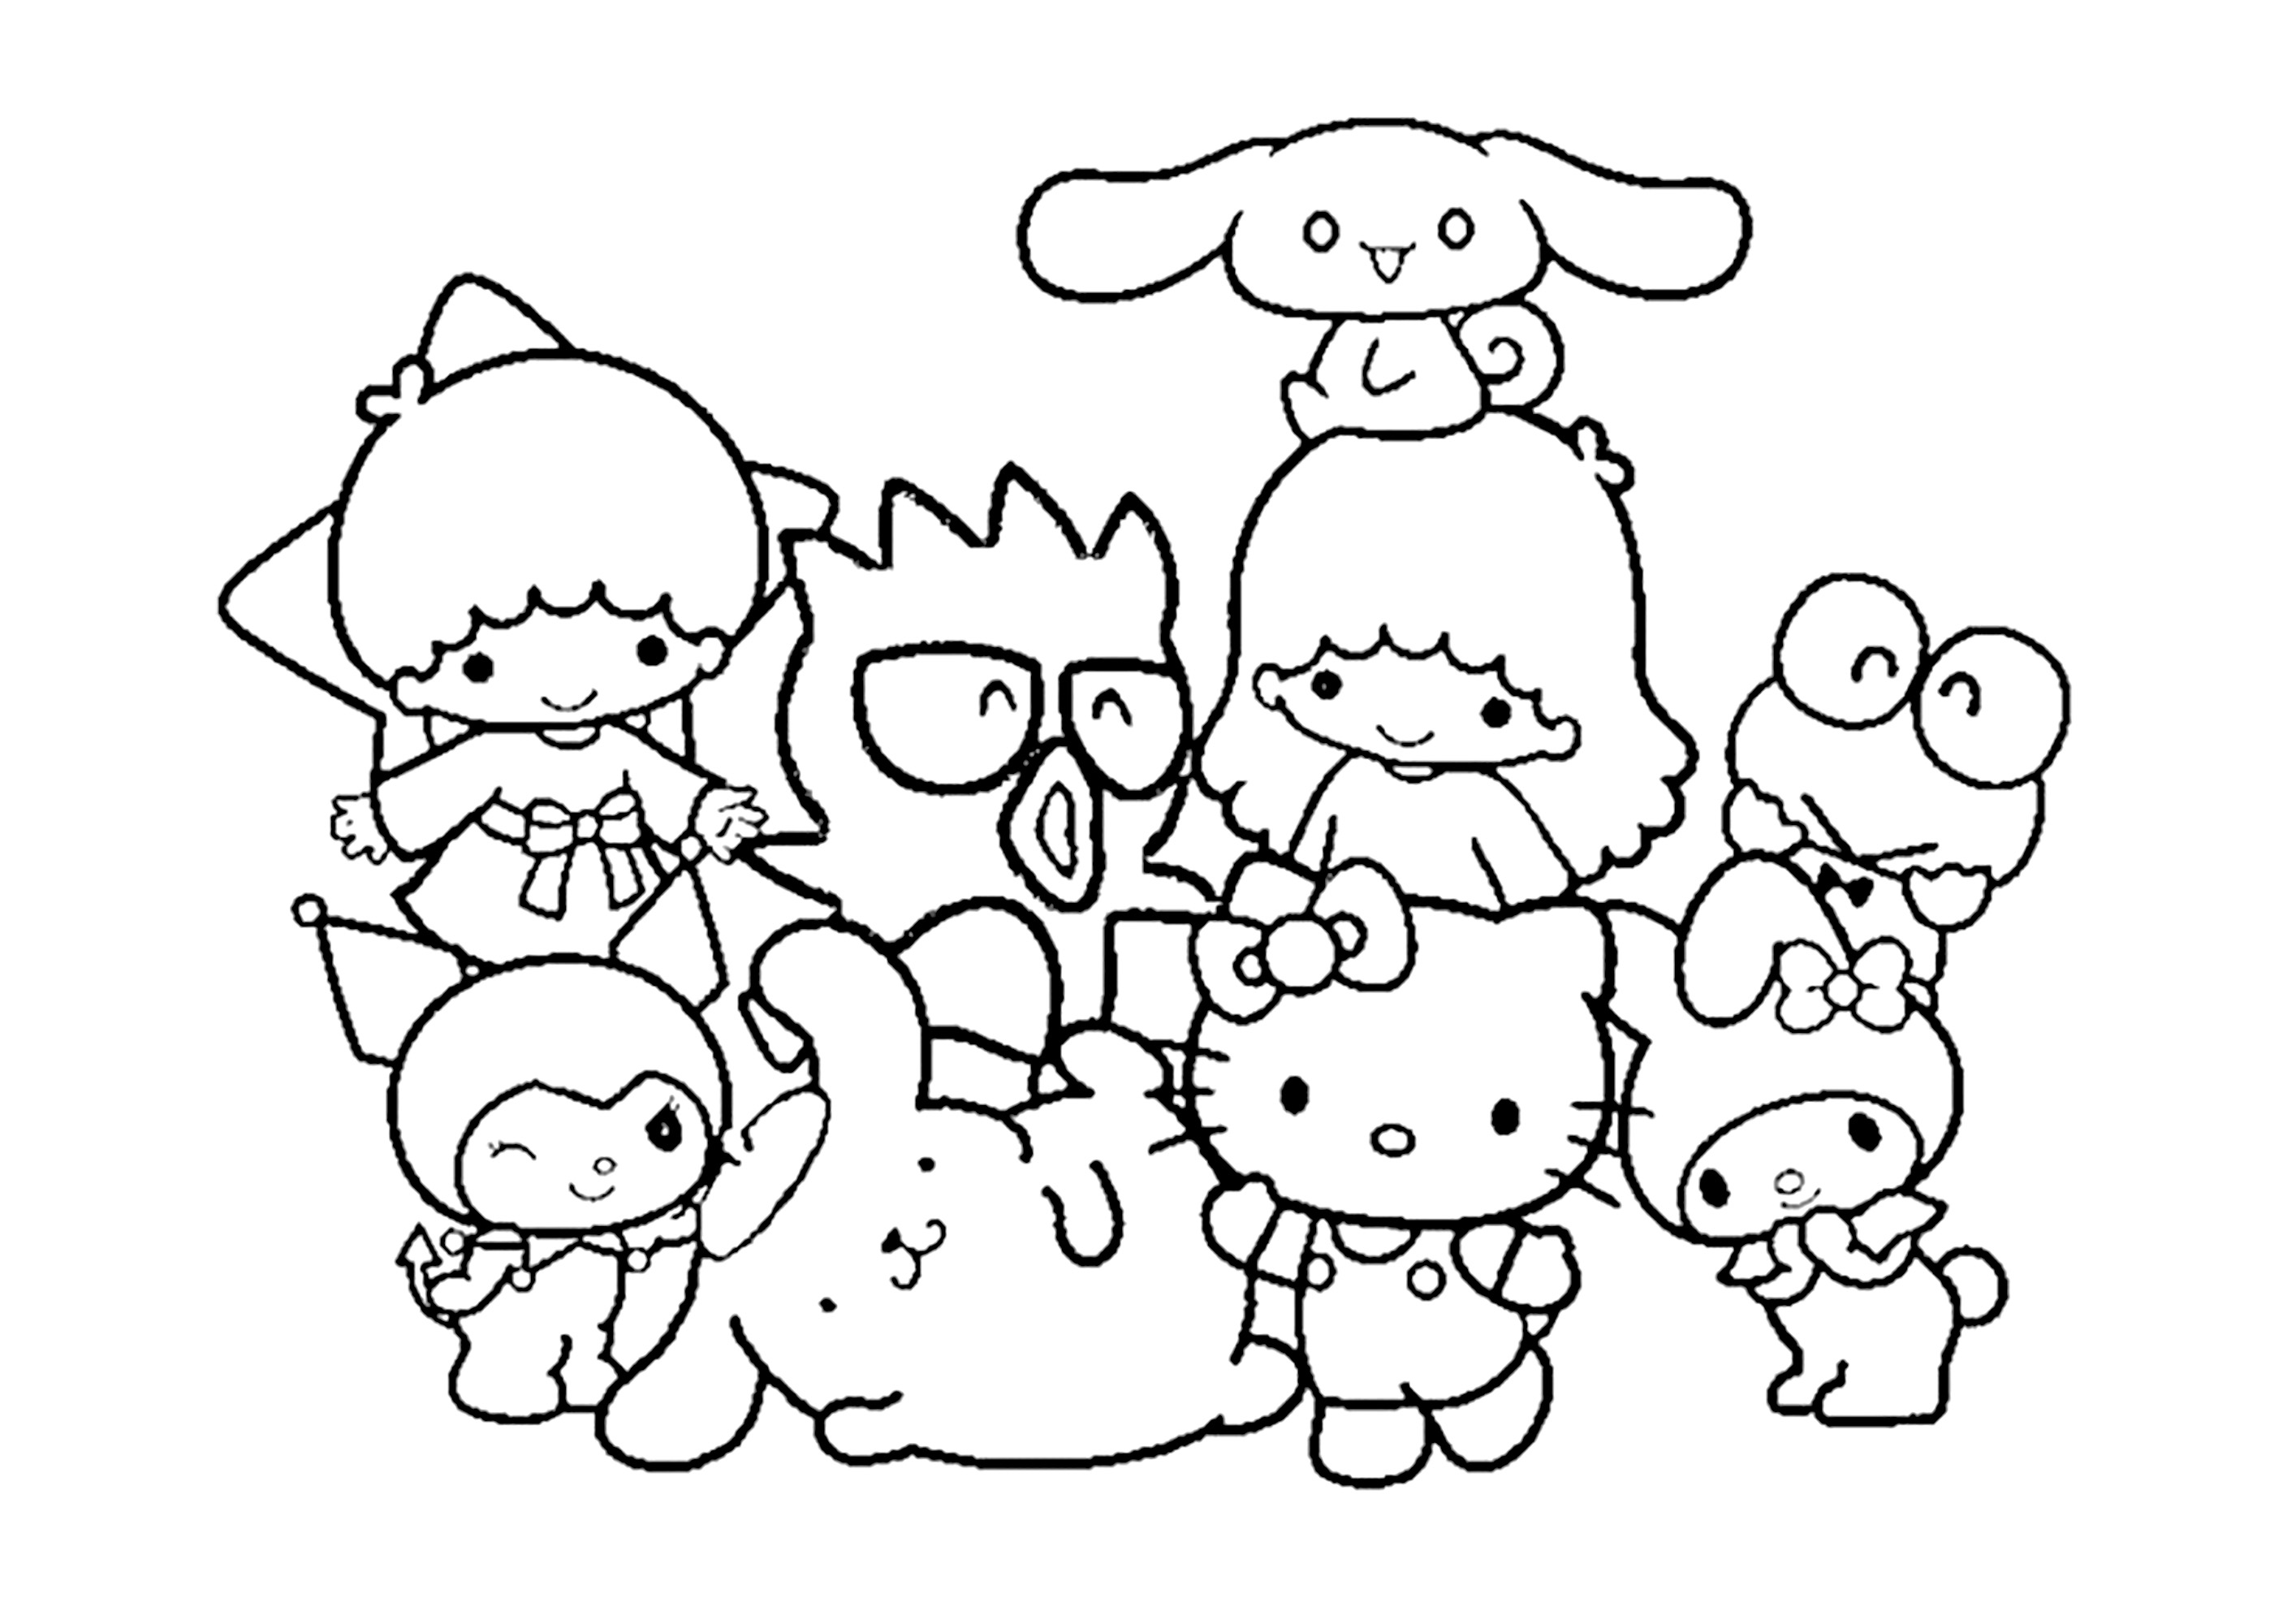 Sanrio's friends. Hello Kitty, Kuromi, My Melody and all their friends